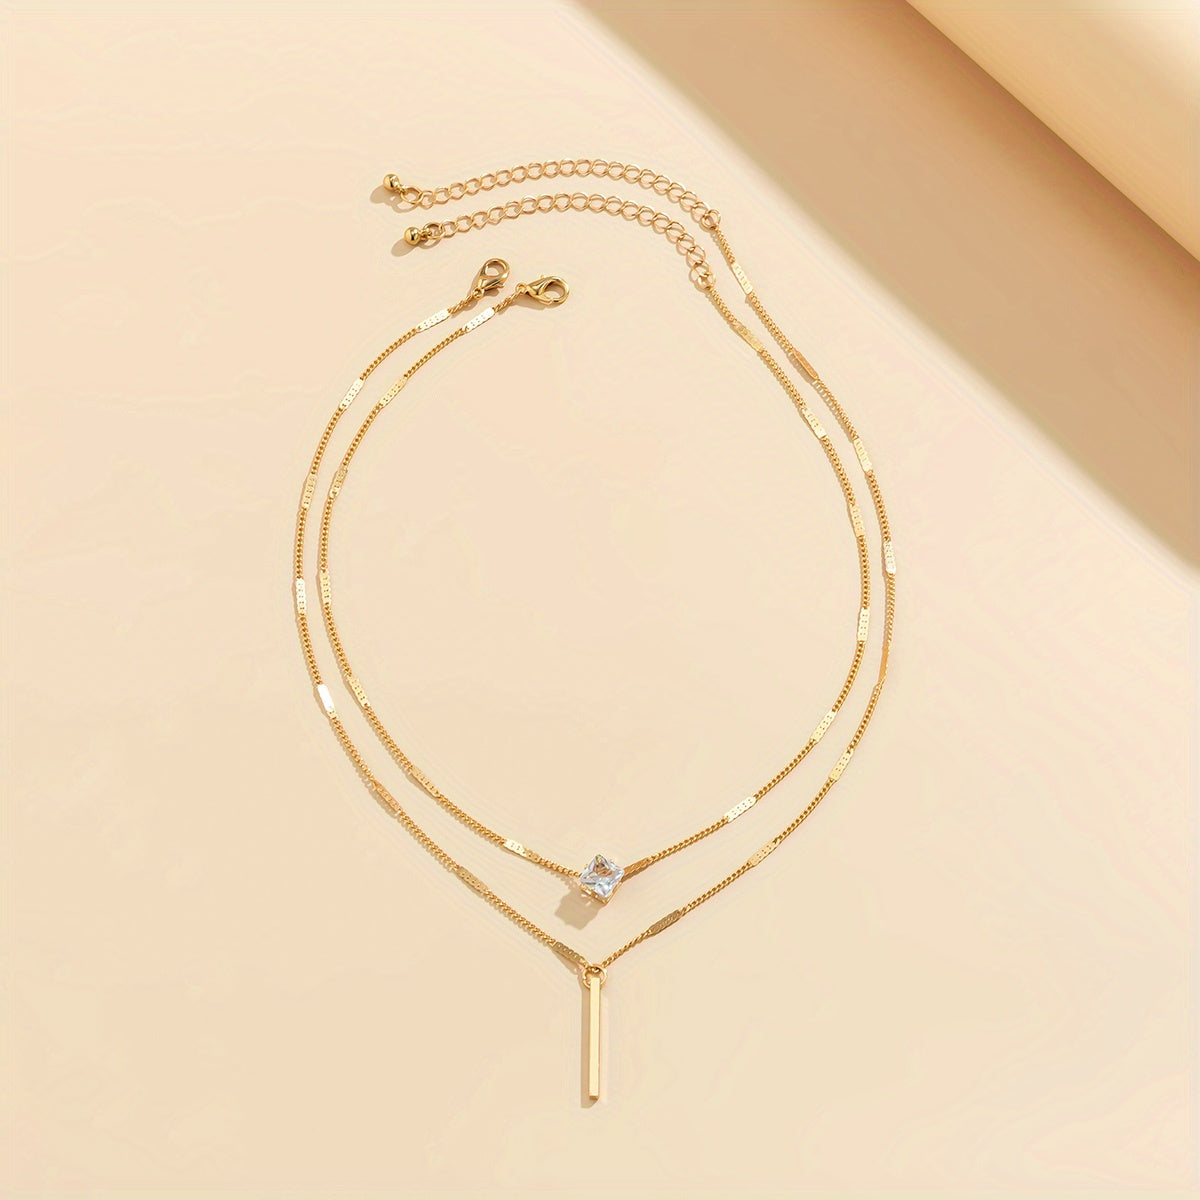 Gorgeous 2-Piece Love Triangle Water Drop Necklace with Zircon Inlay - Perfect for Any Occasion!